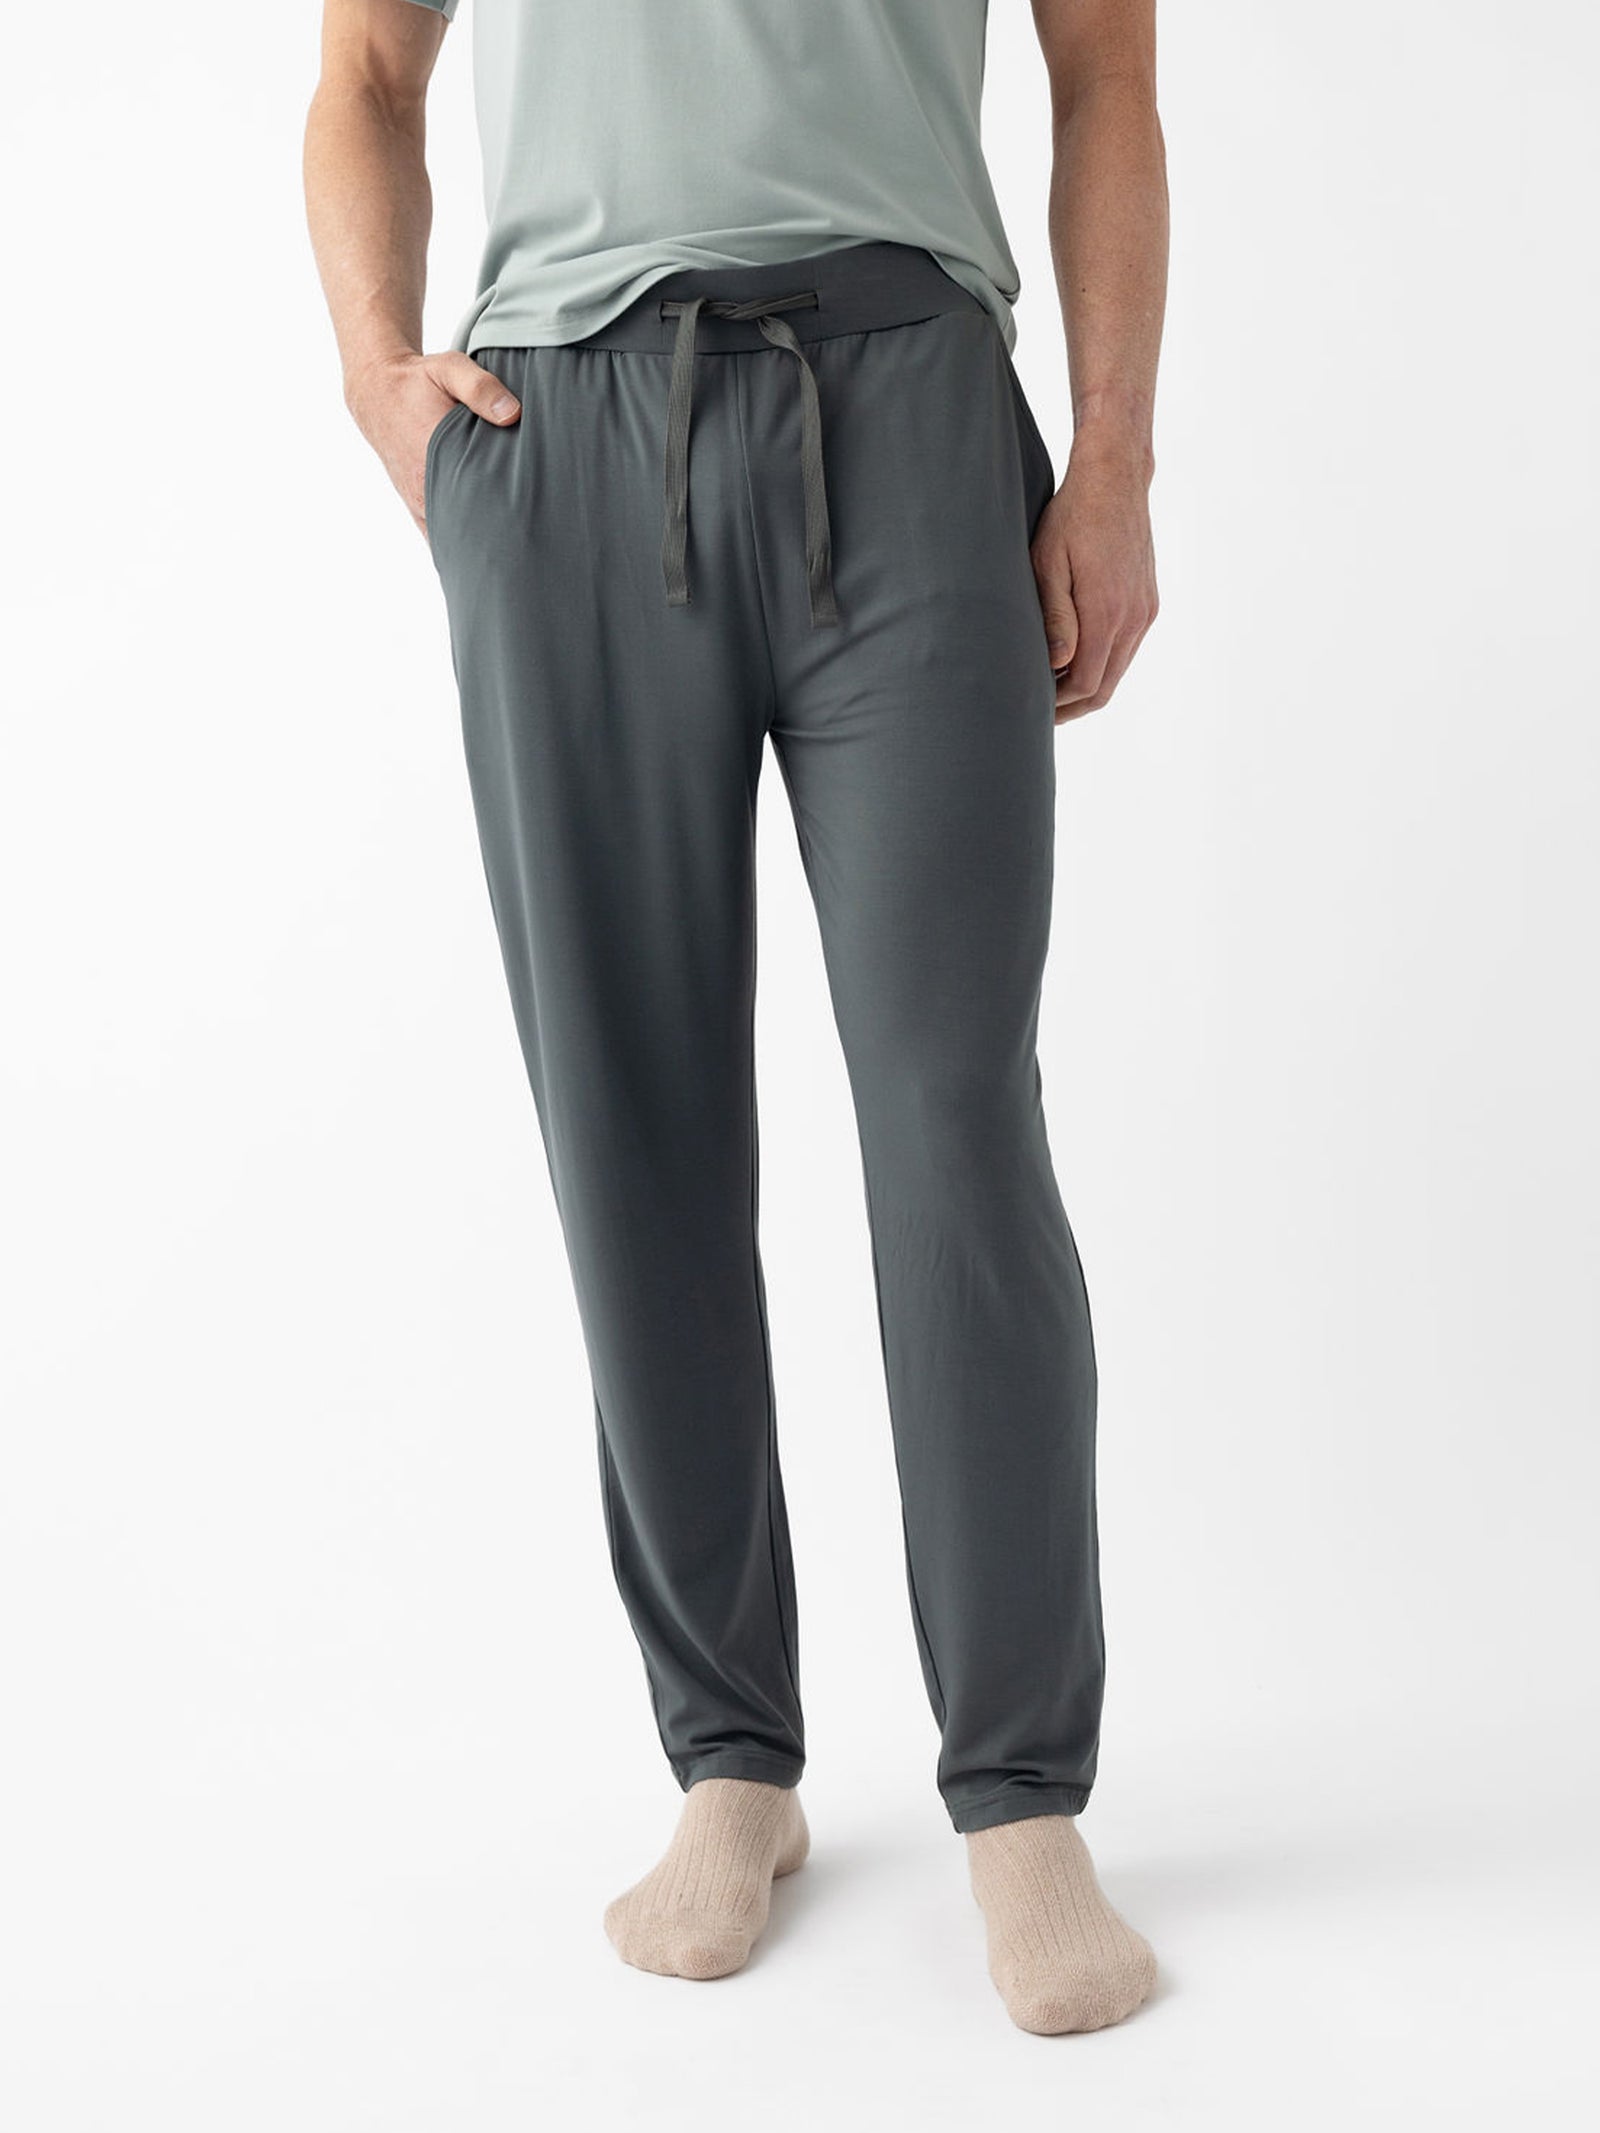 Waste down of man wearing storm pajama pants with white background 